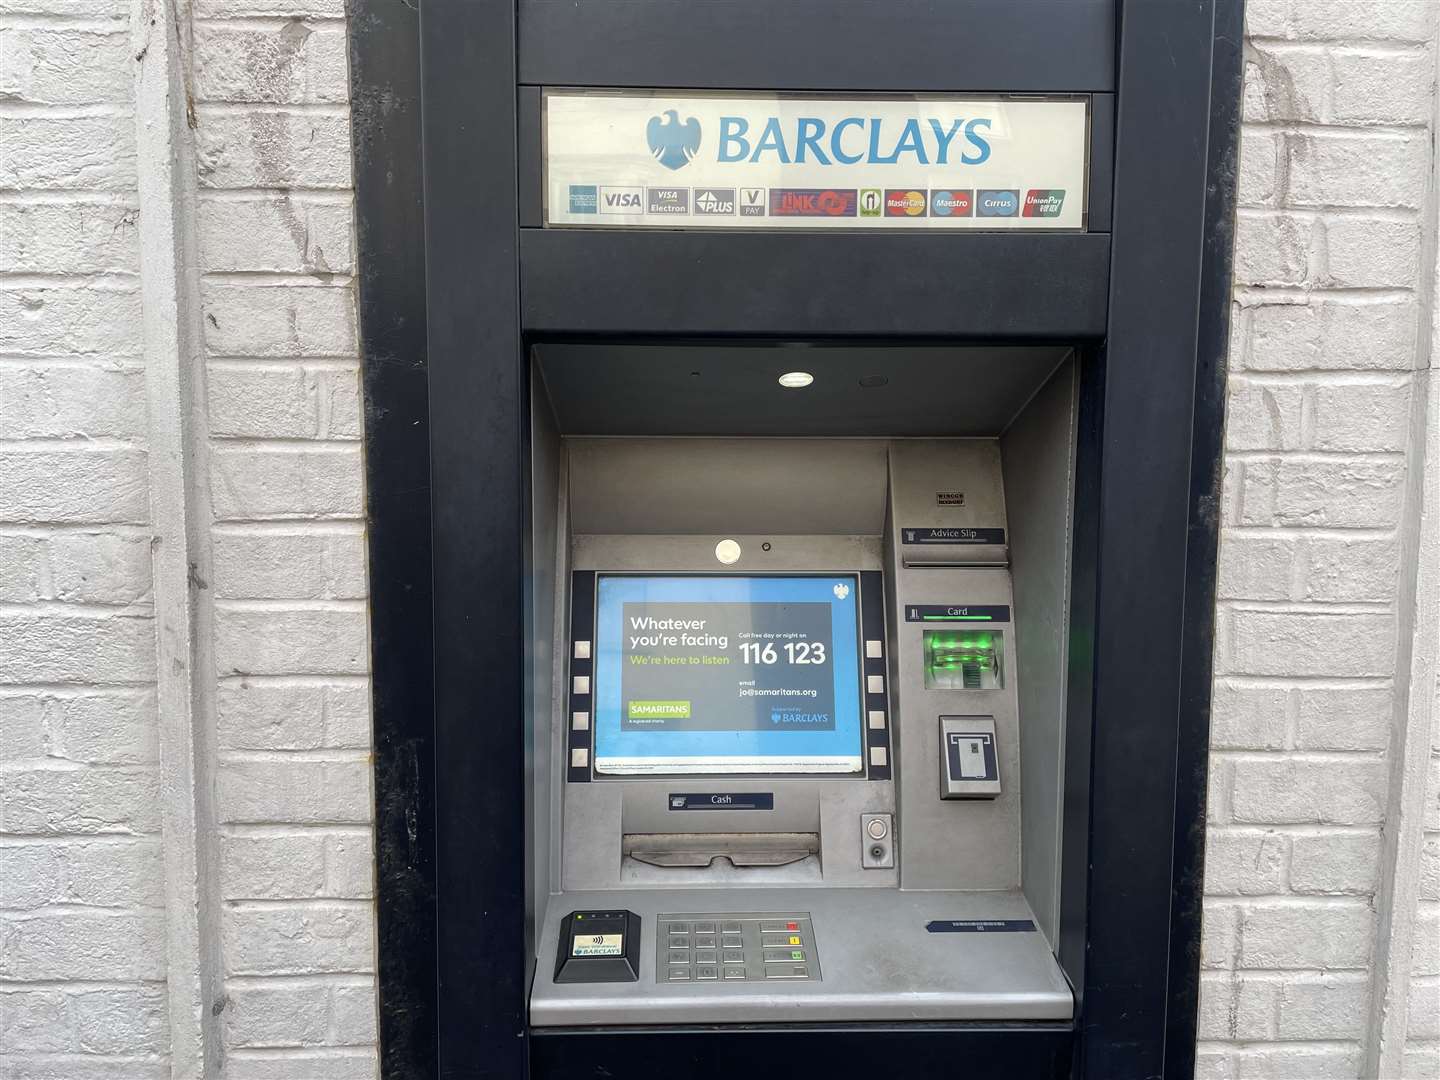 Barclays' ATM will be the third to be removed in recent times following the closure of HSBC